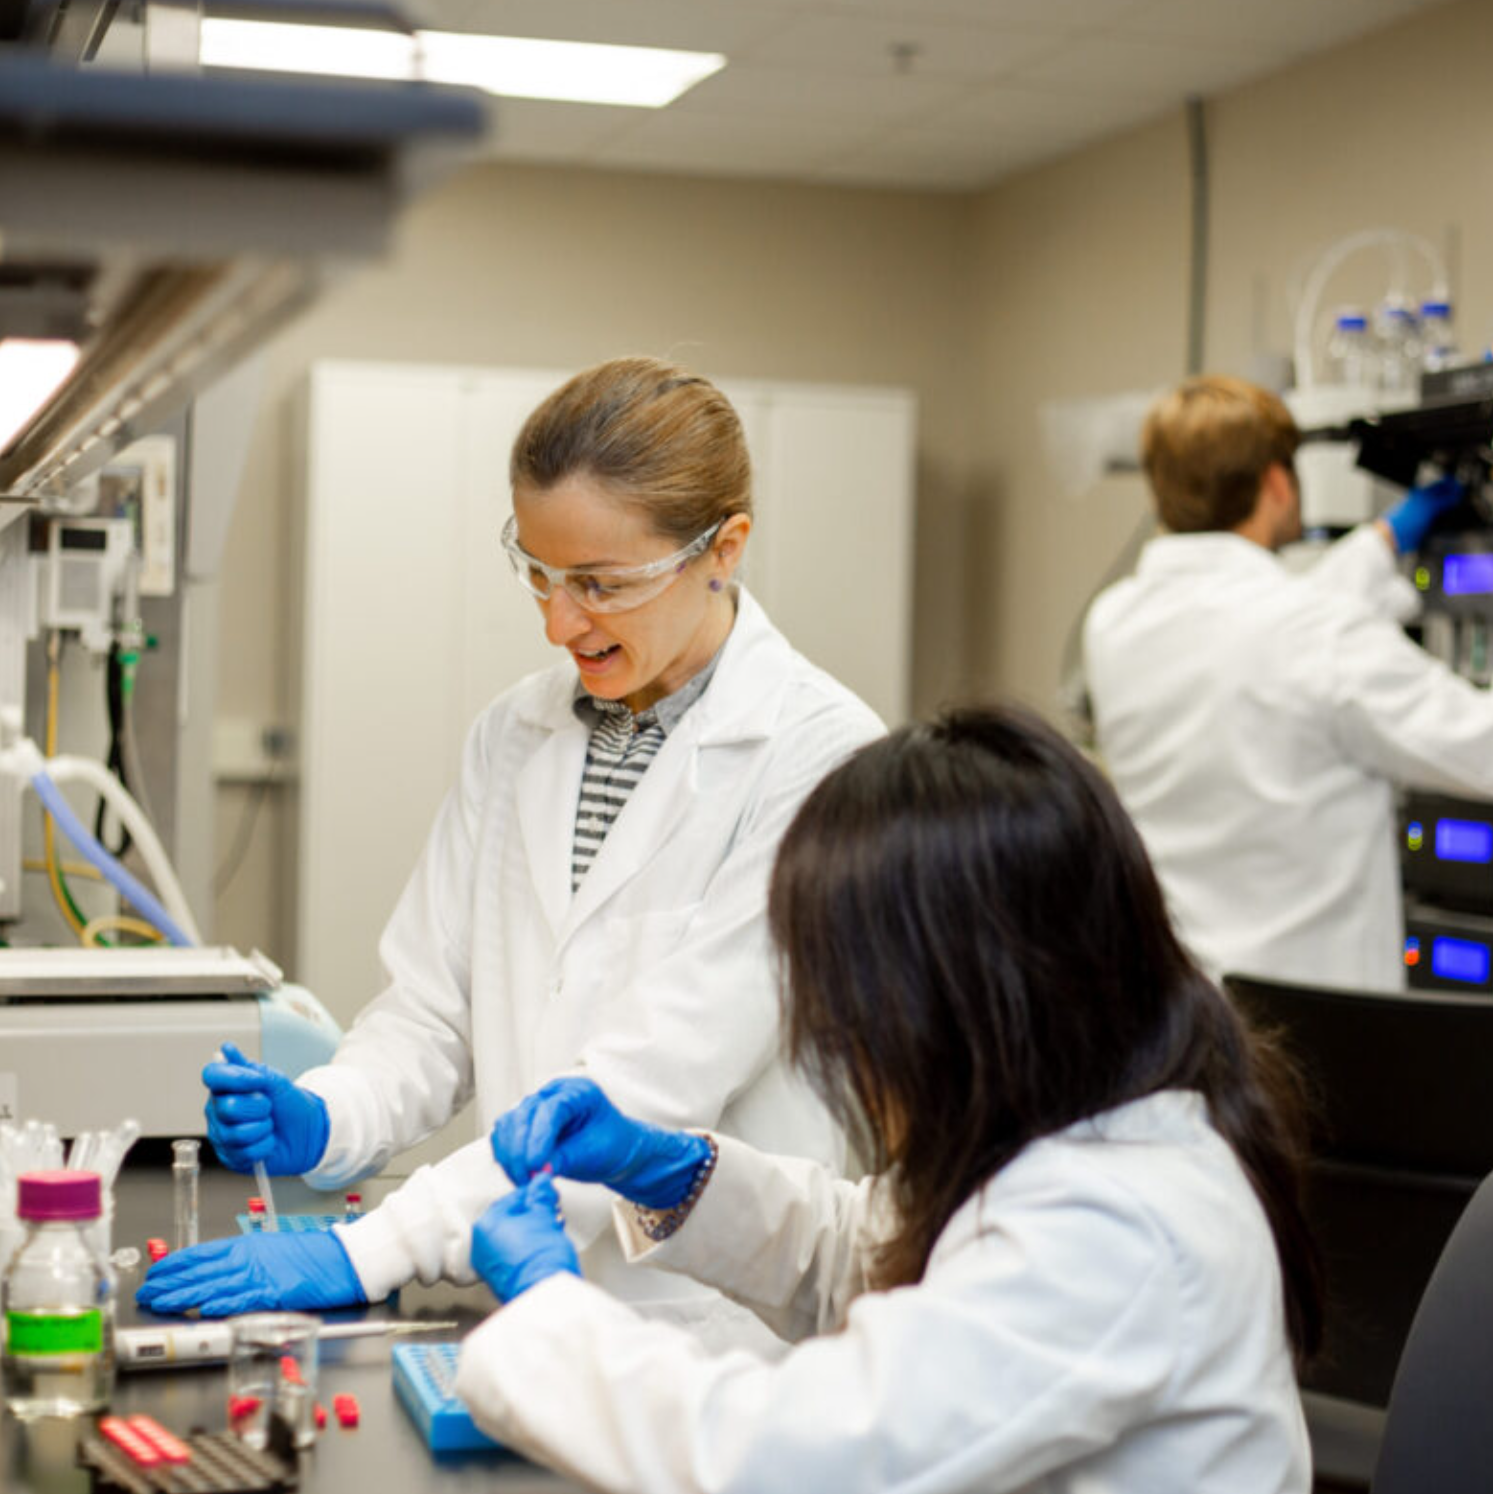 UT NEWS: UT Austin and Partners Support Innovators Fighting COVID-19 With Launch of New Consortium